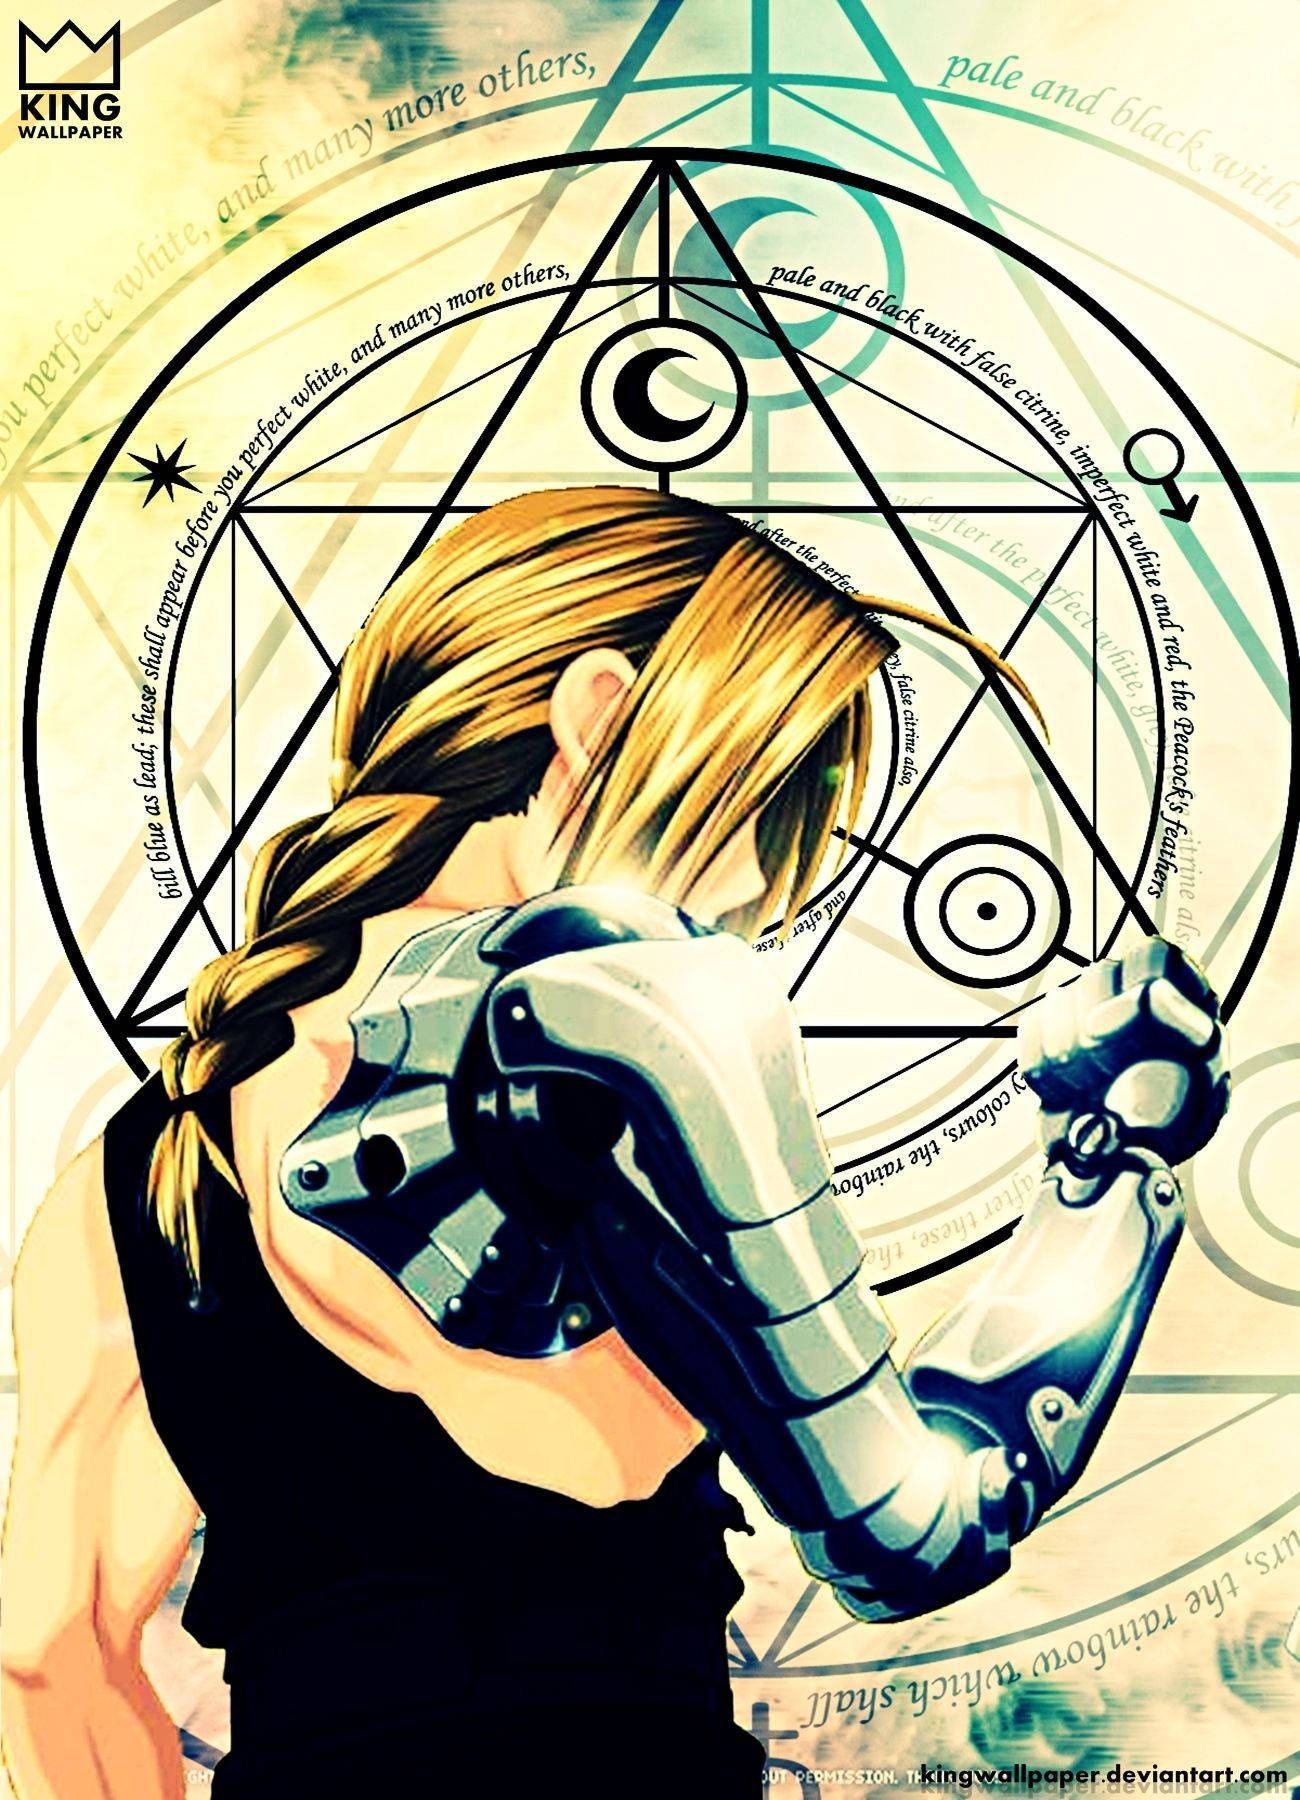 Edward Elric With His Robotic Arm In Fullmetal Alchemist Wallpaper